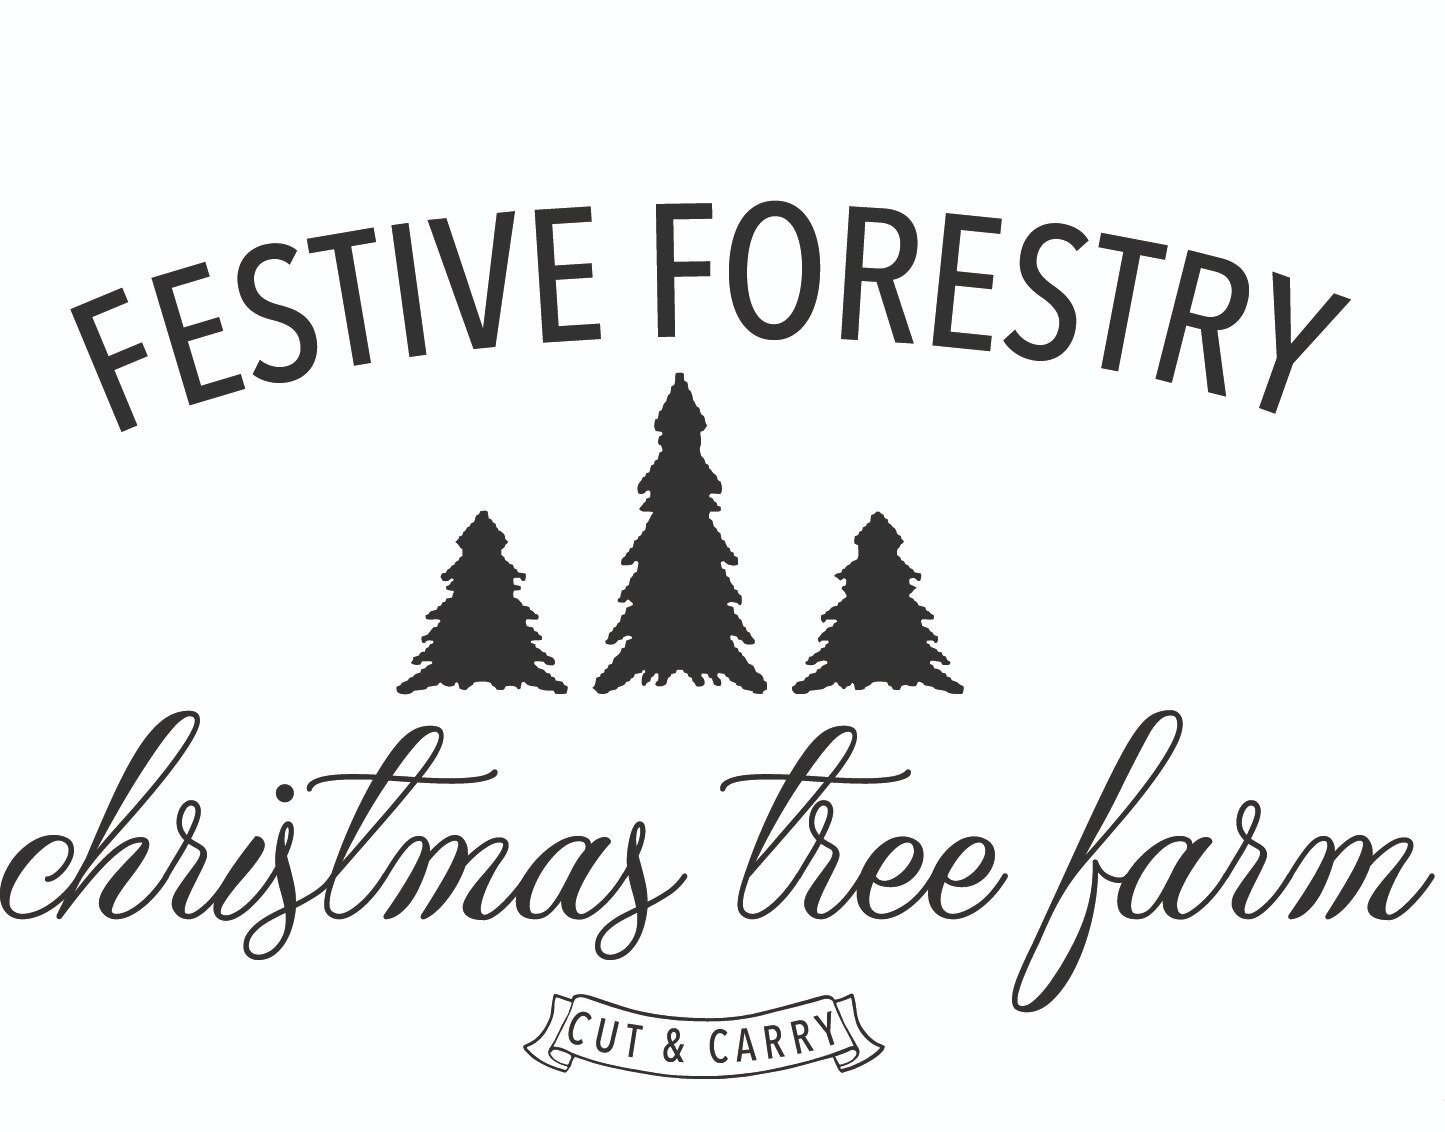 Festive Forestry